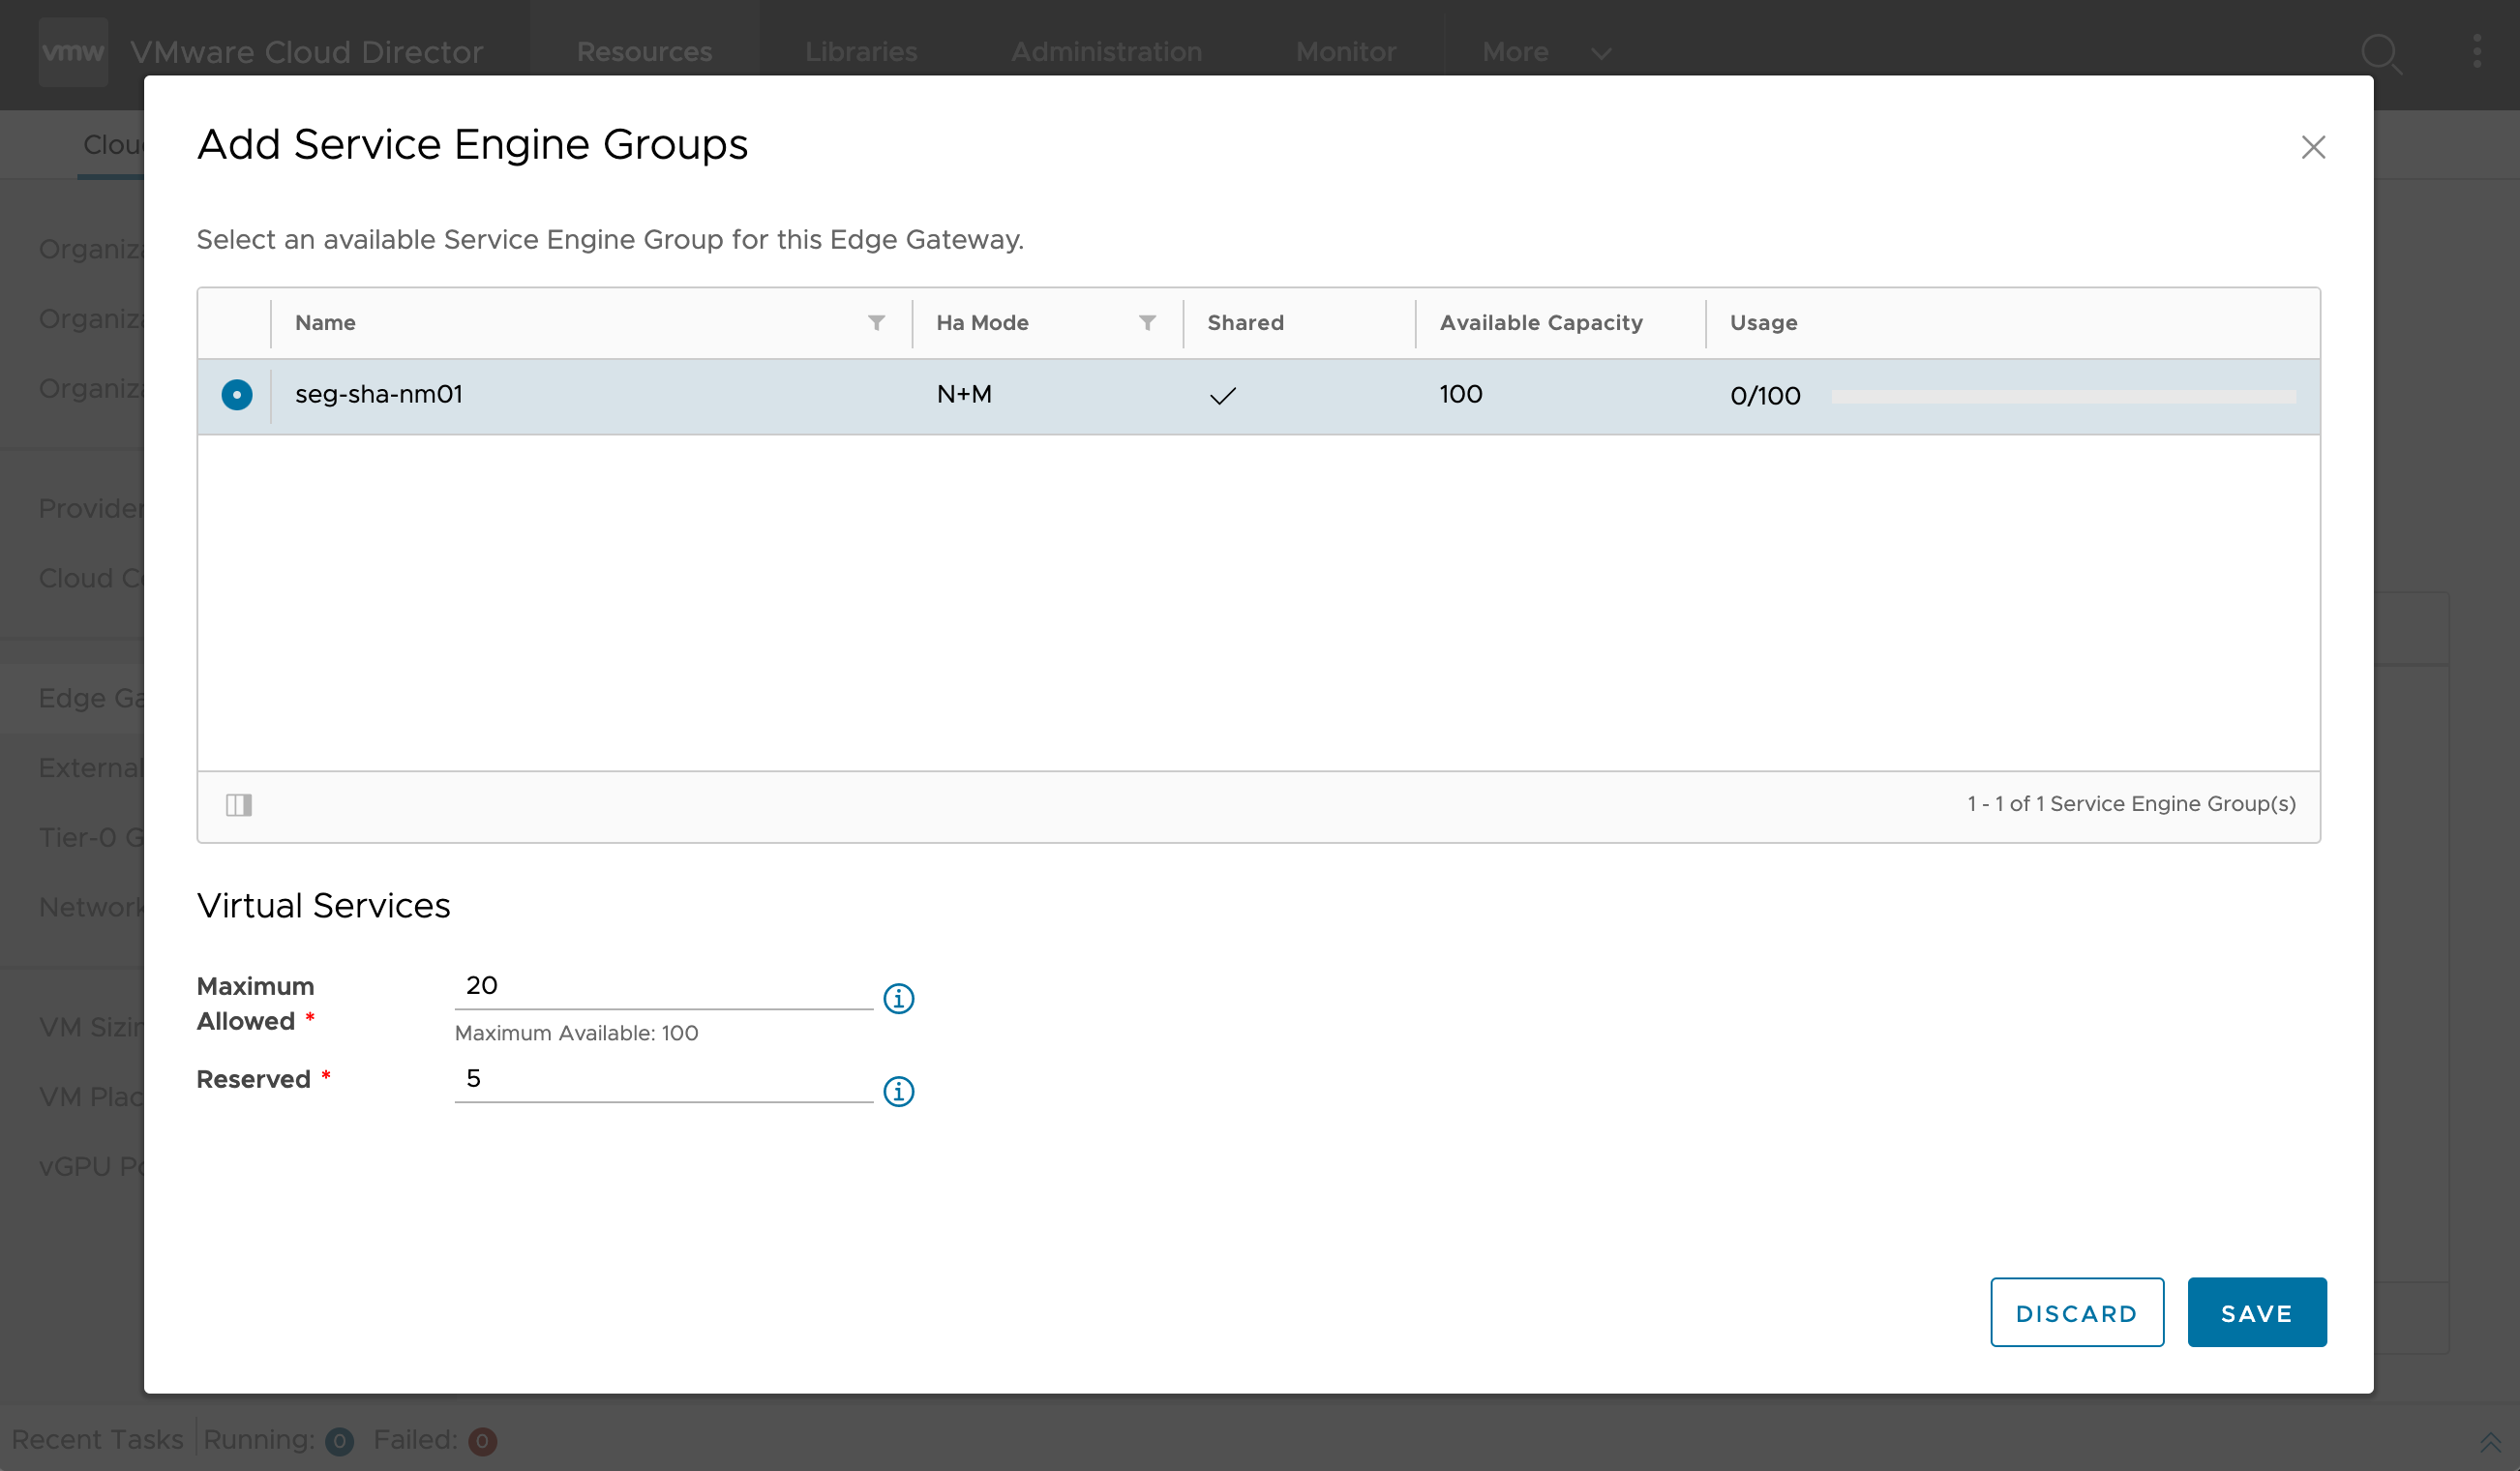 Assign a Service Engine Group to an NSX-T Data Center Edge Gateway in VMware Cloud Director